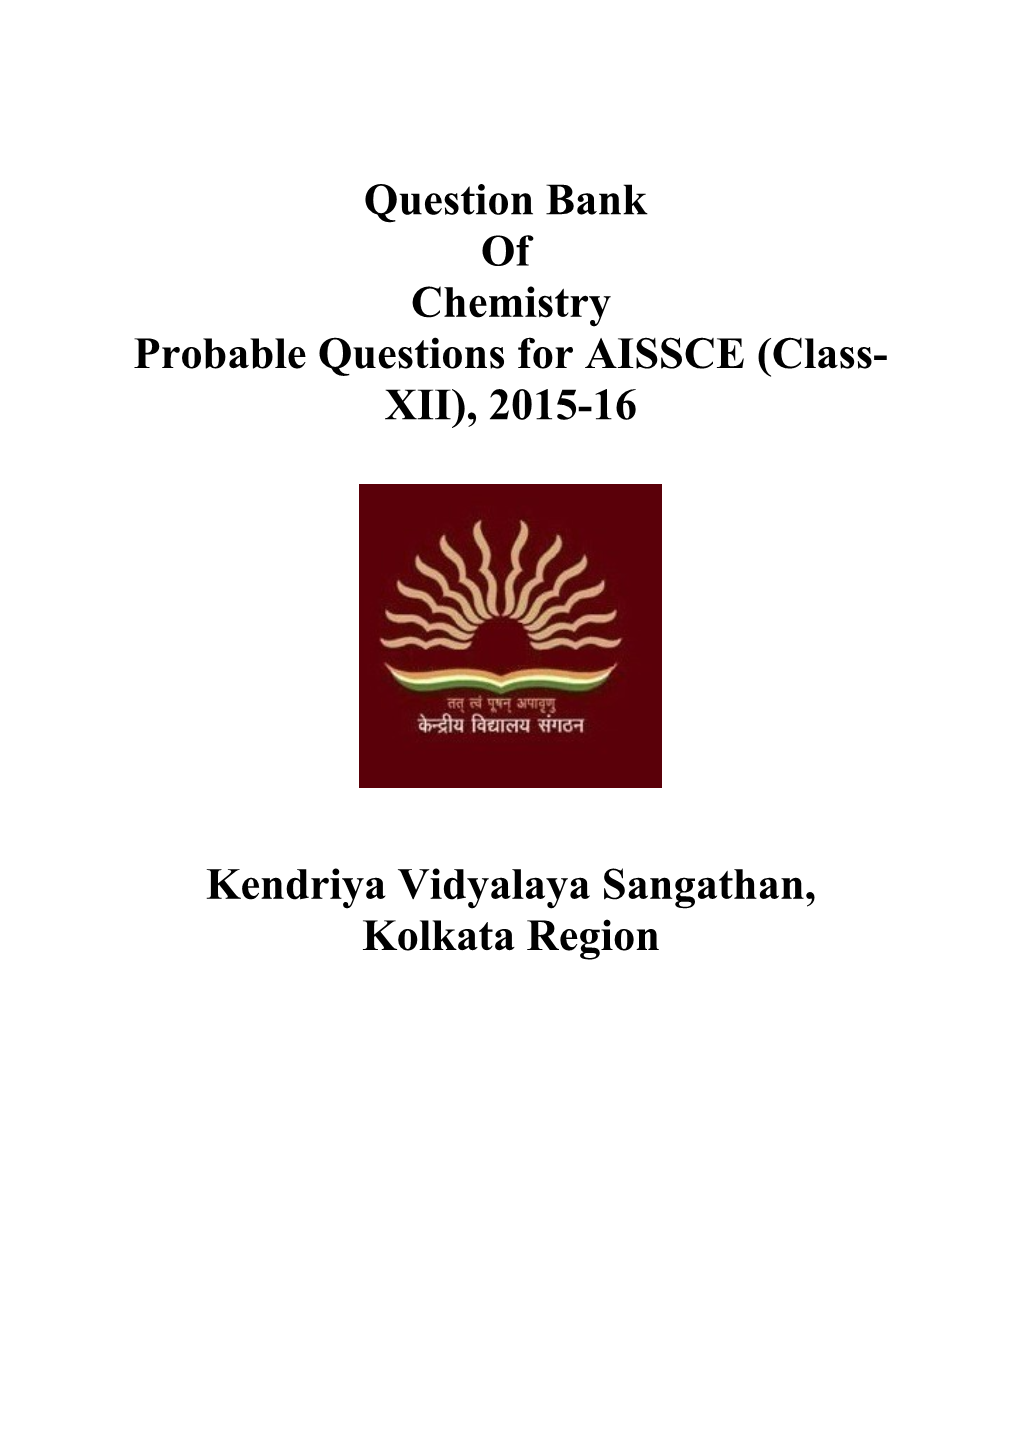 Probable Questions for AISSCE (Class-XII), 2015-16